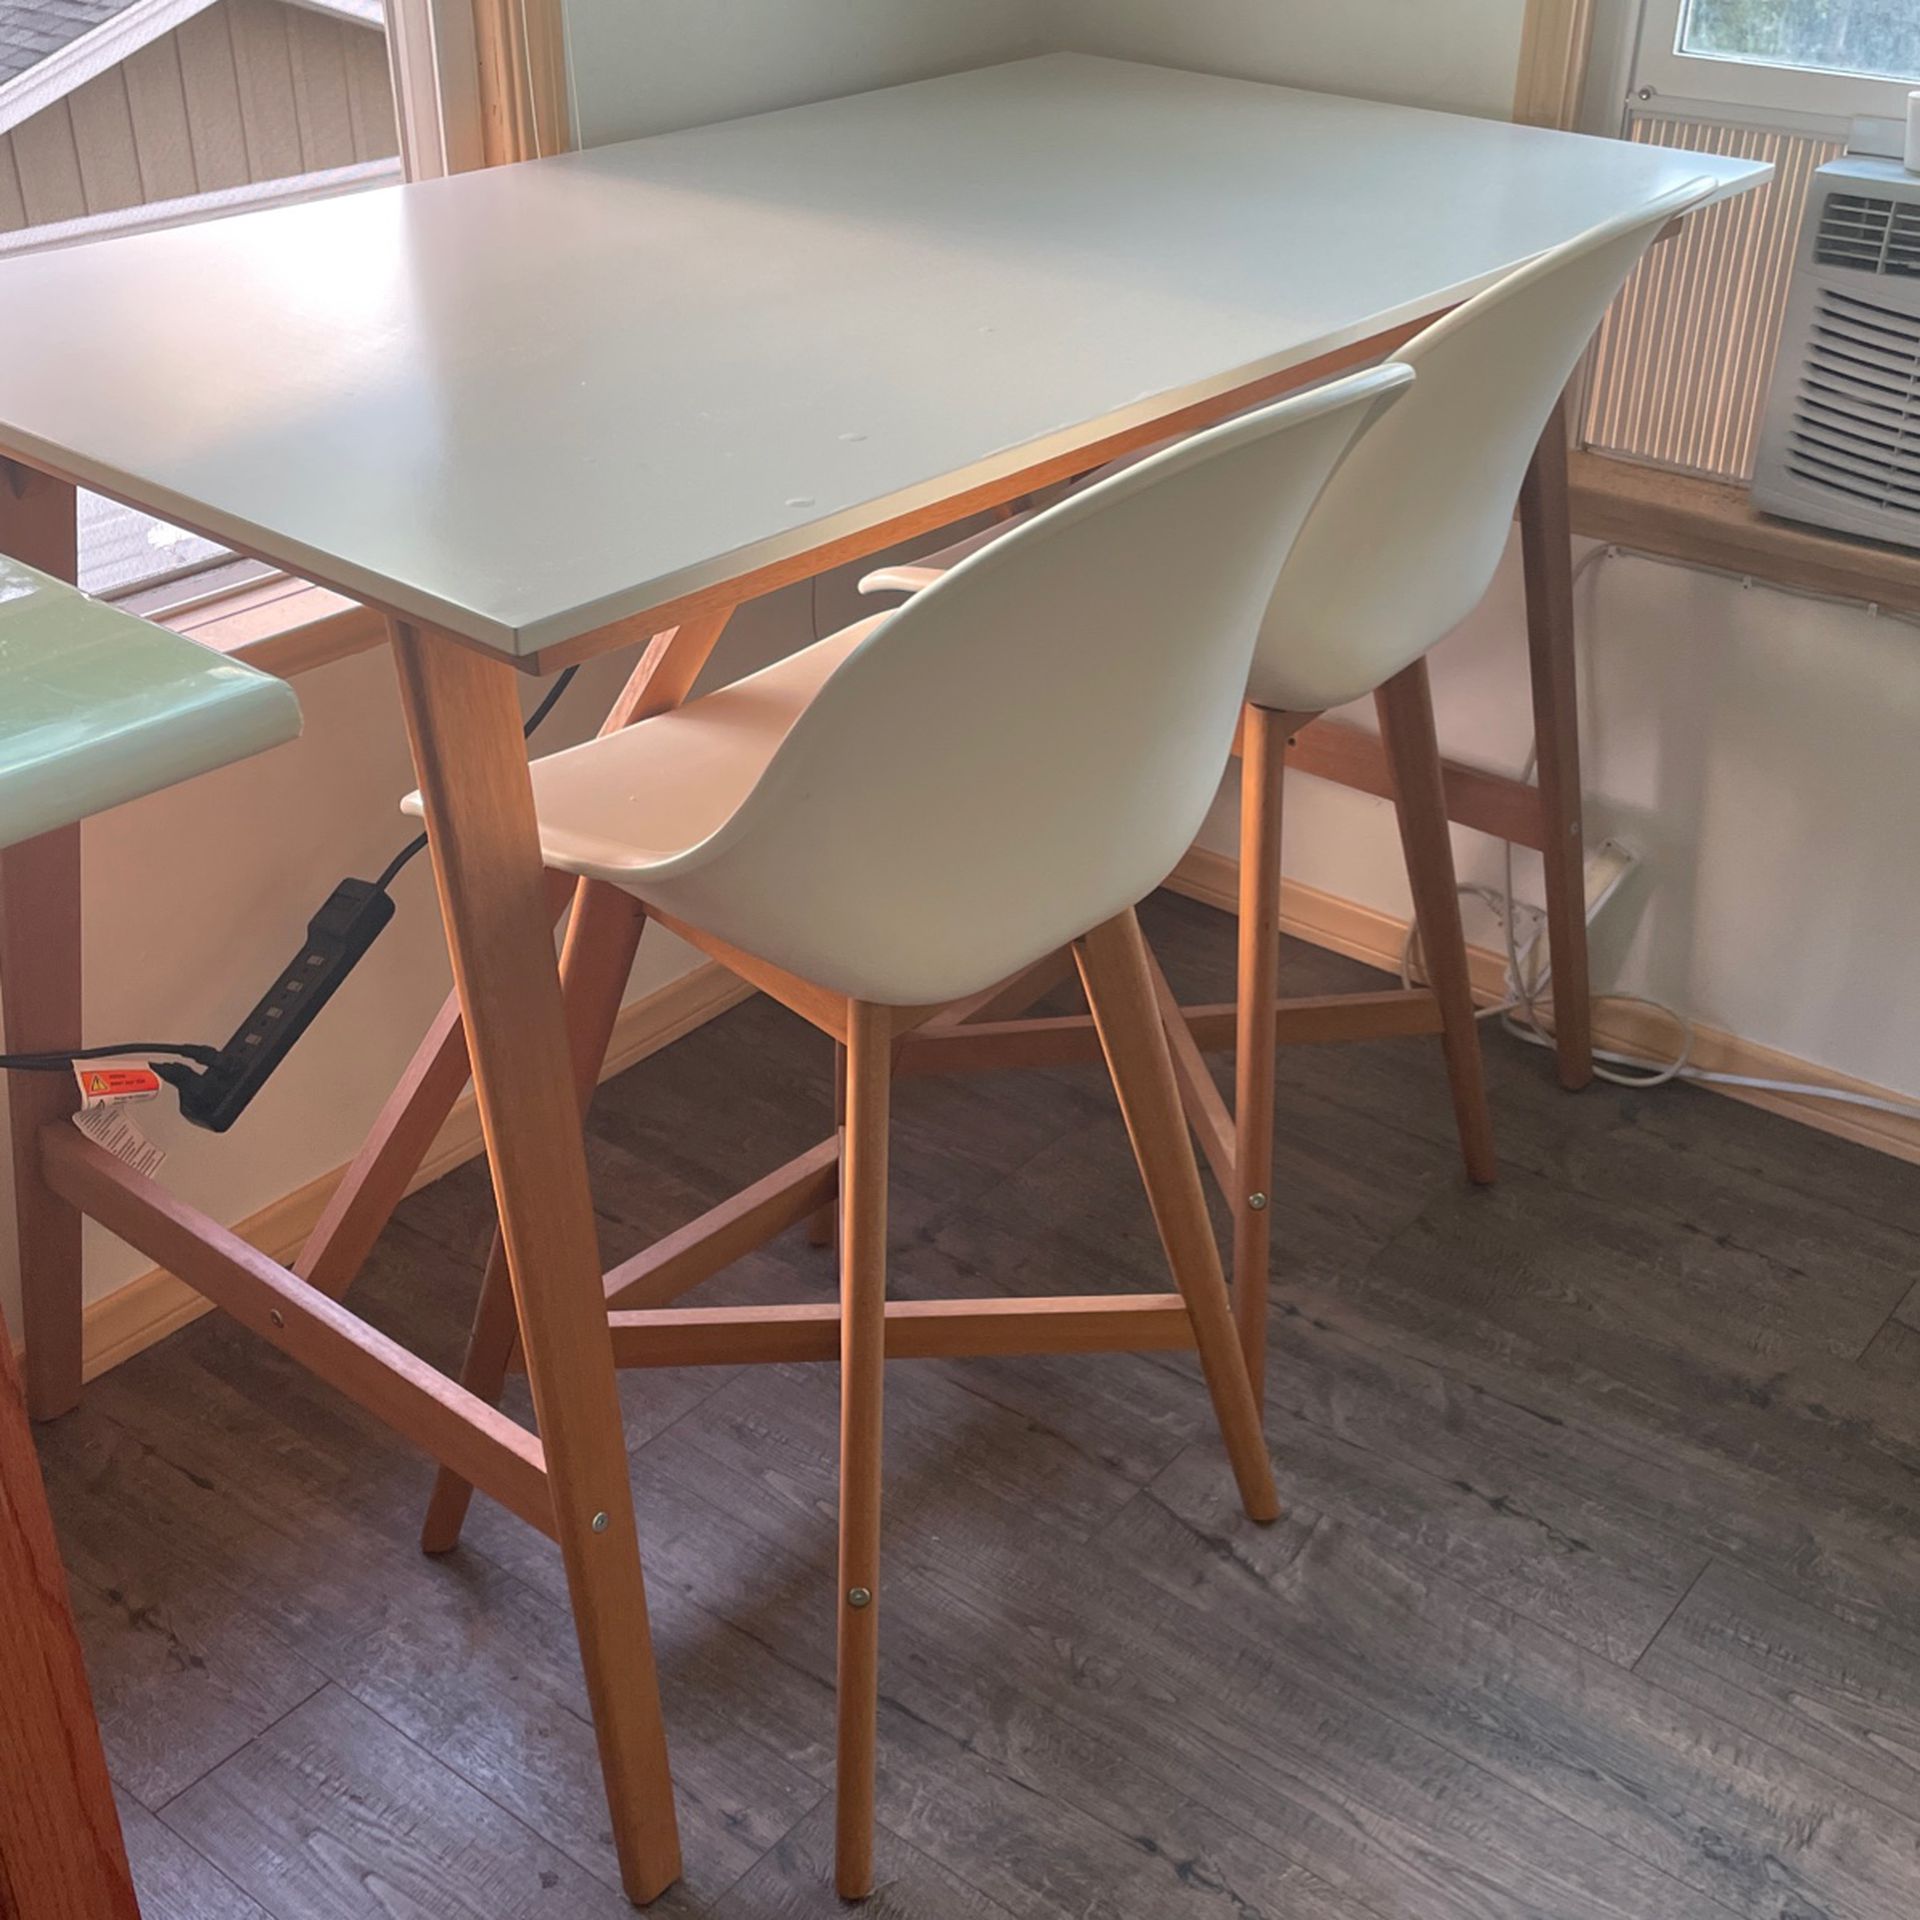 IKEA FANBYN Kitchen Table with 2 Chairs